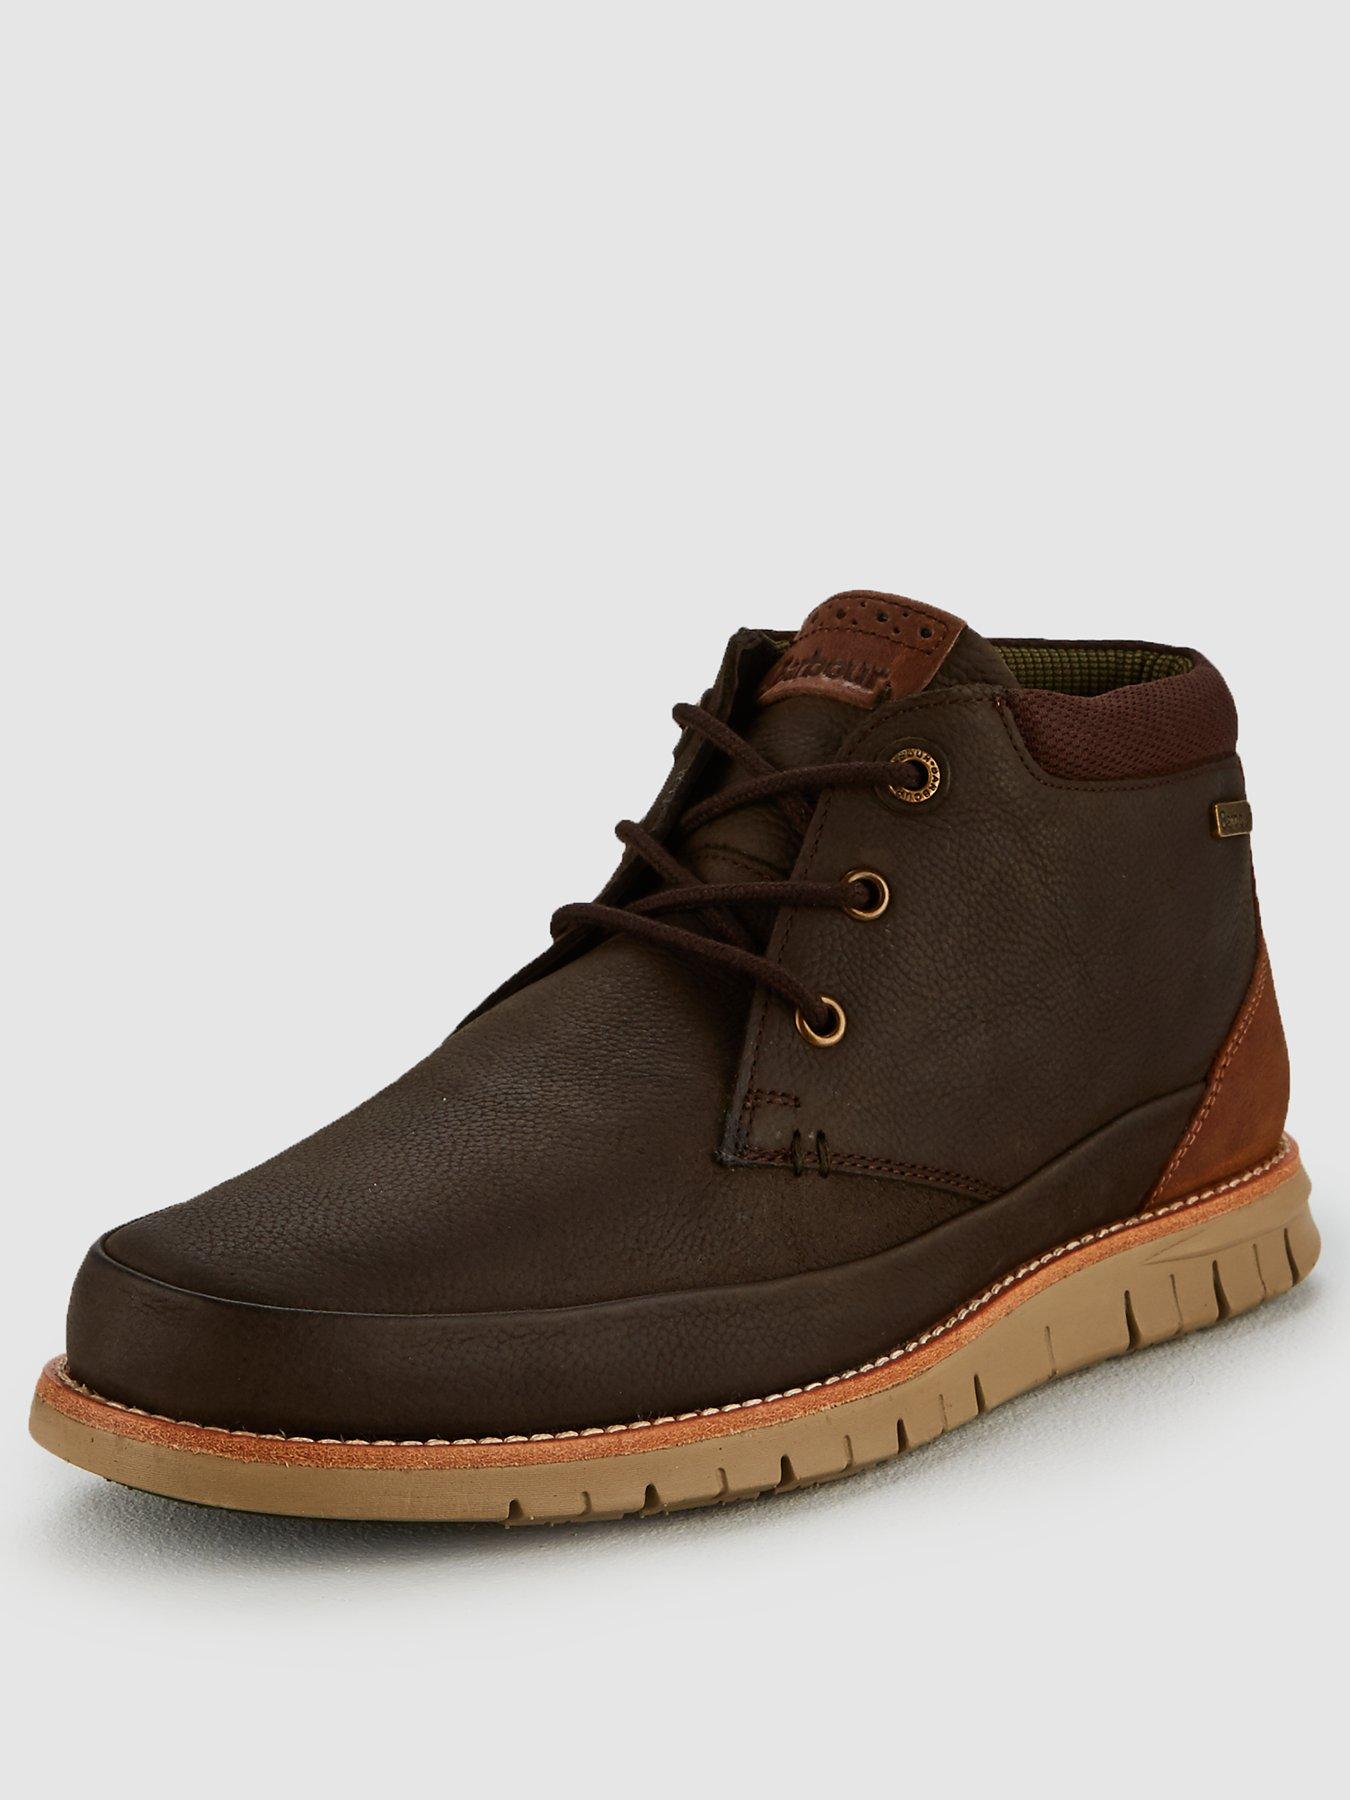 mens brown barbour boots